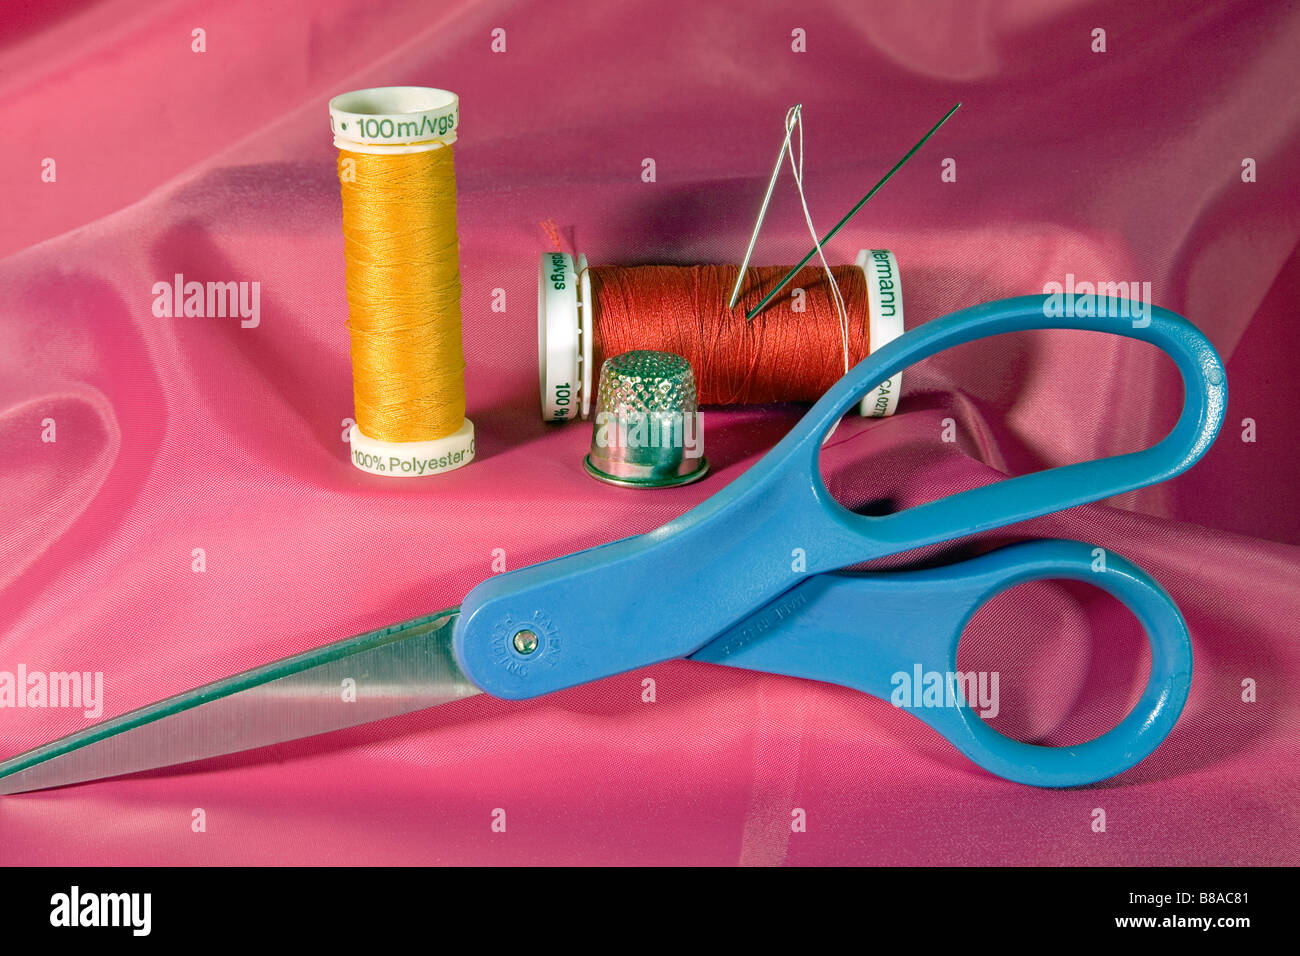 A sewing kit containing needles thread on spools scissors and thimble Stock Photo